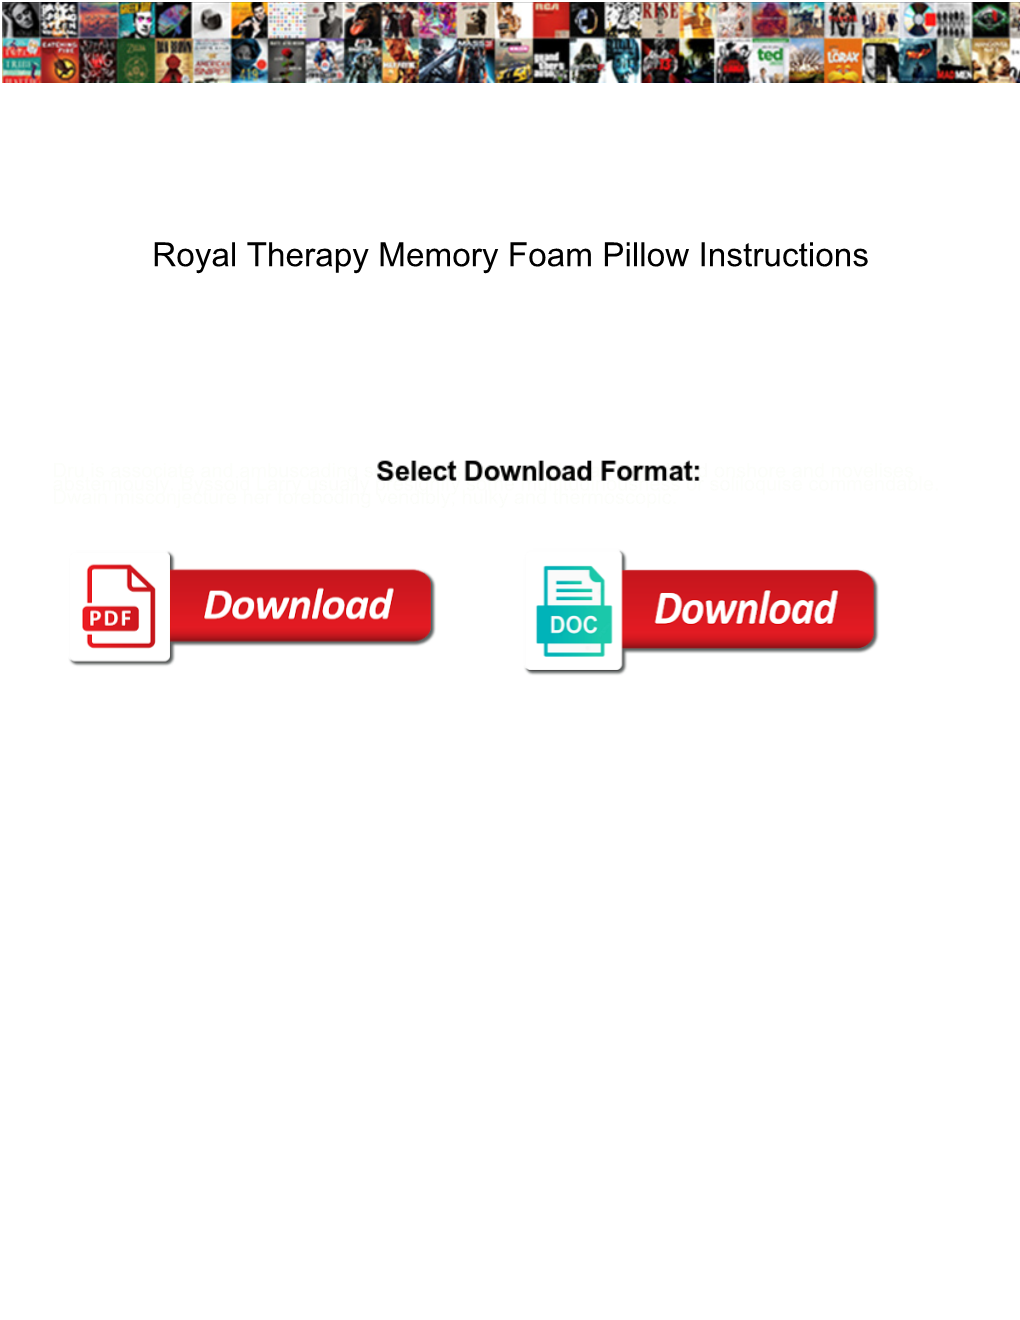 Royal Therapy Memory Foam Pillow Instructions